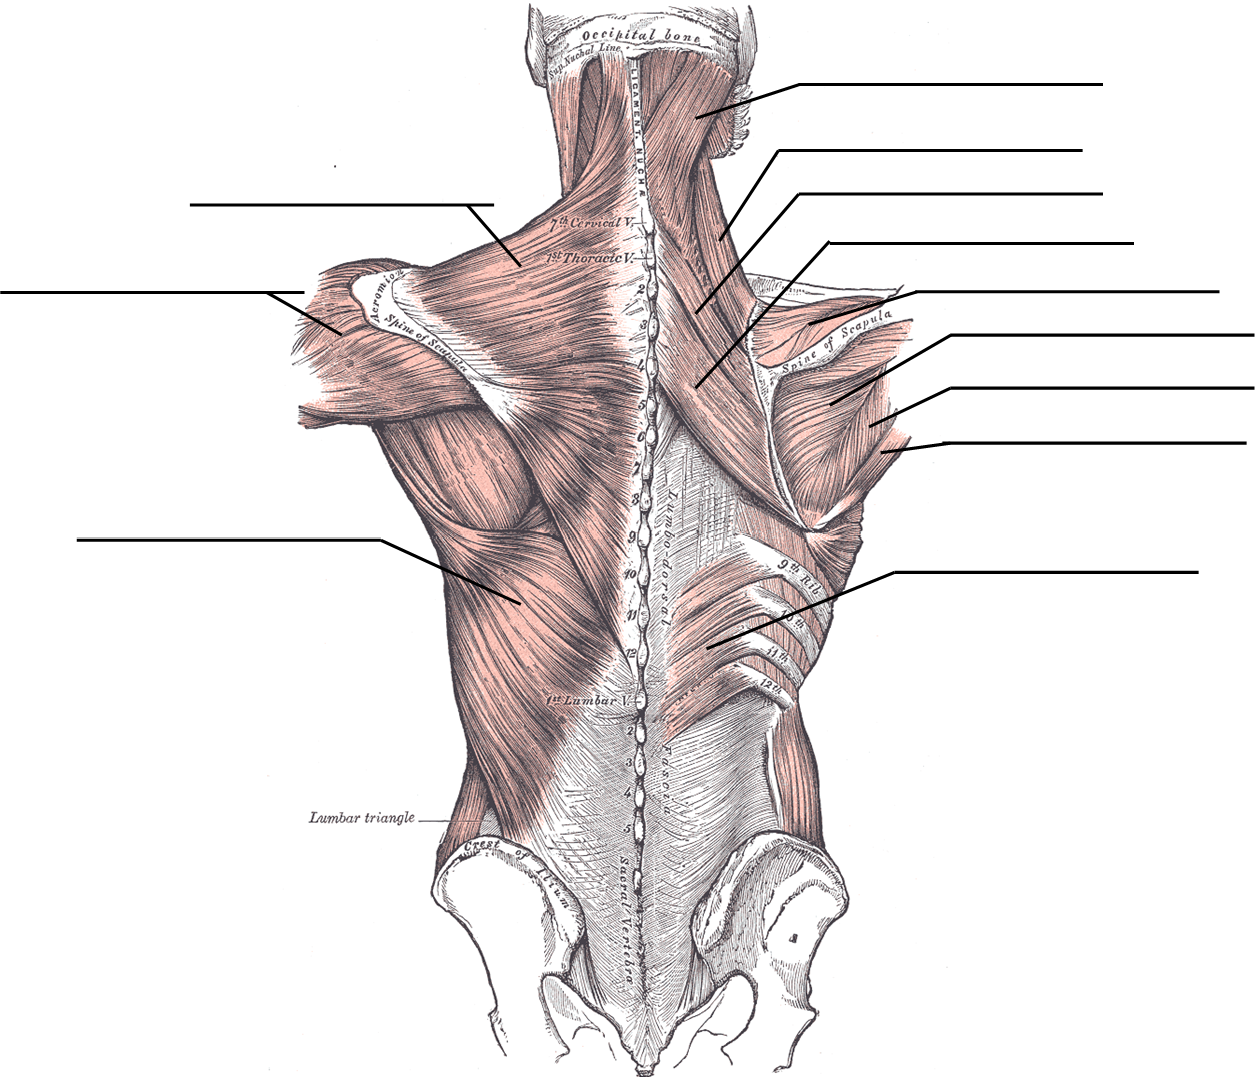 Posterior trunk muscles figure for labeling